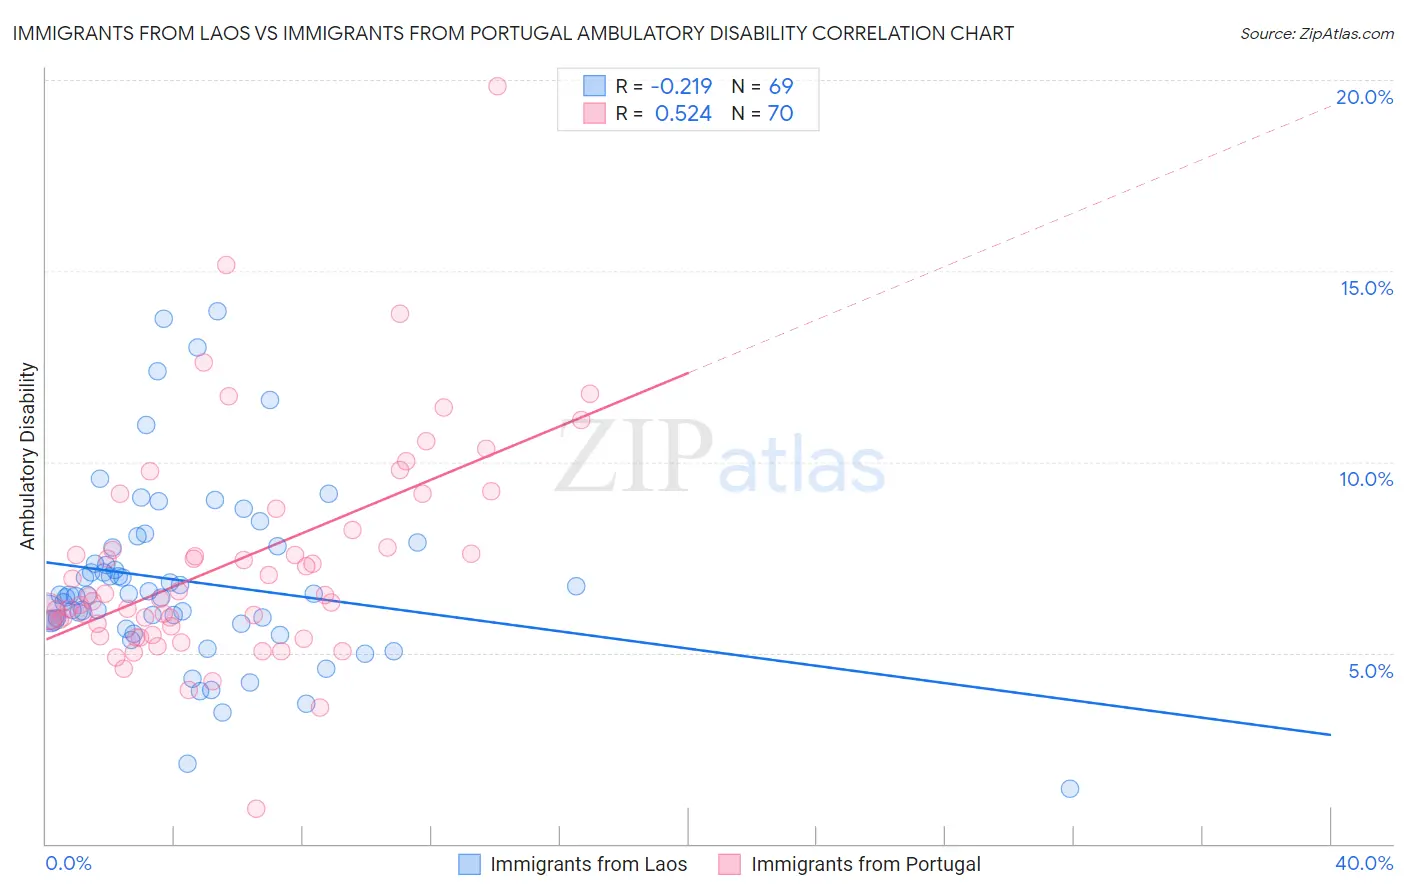 Immigrants from Laos vs Immigrants from Portugal Ambulatory Disability